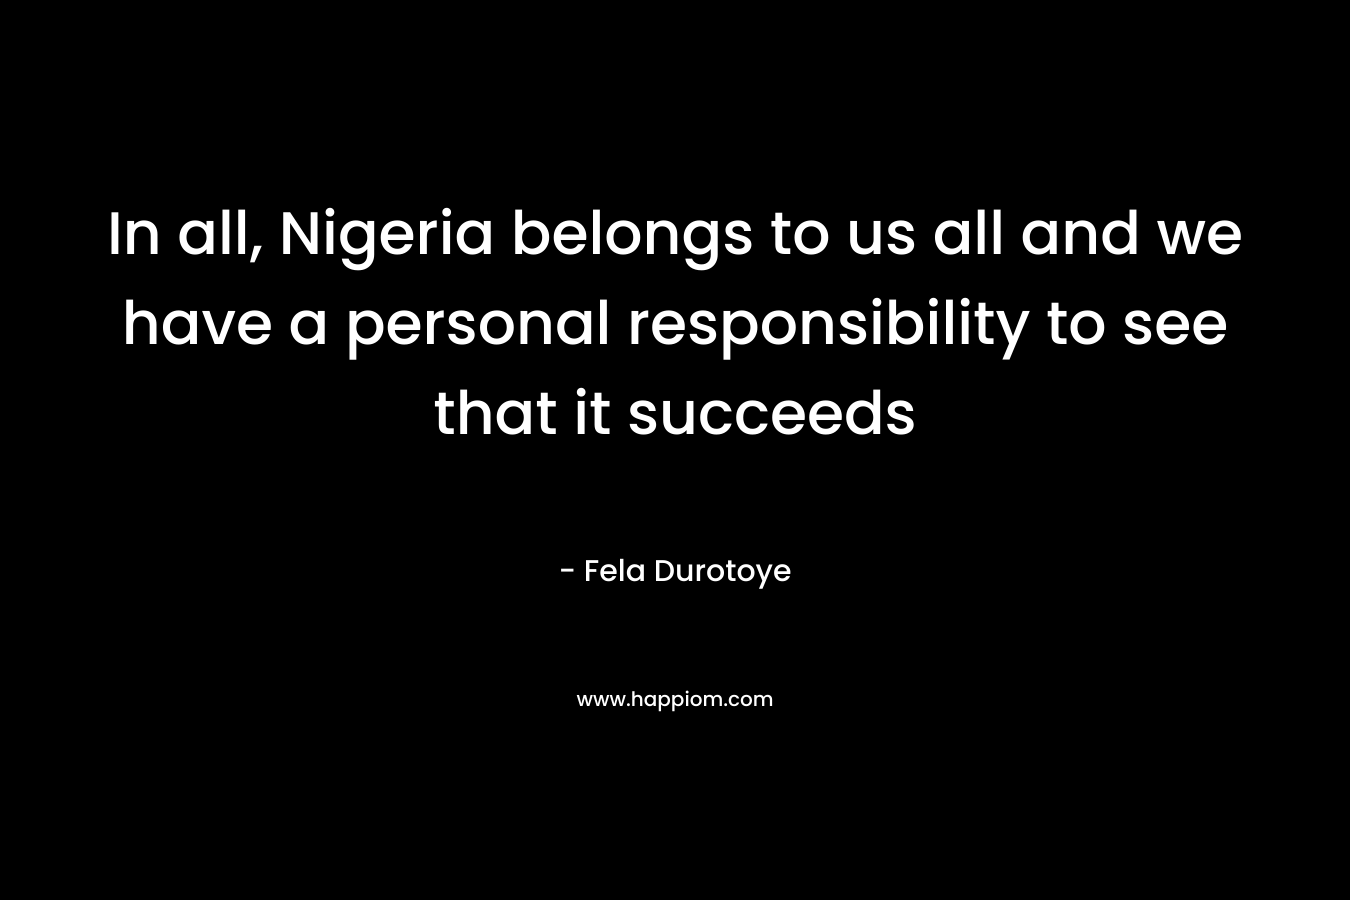 In all, Nigeria belongs to us all and we have a personal responsibility to see that it succeeds – Fela Durotoye